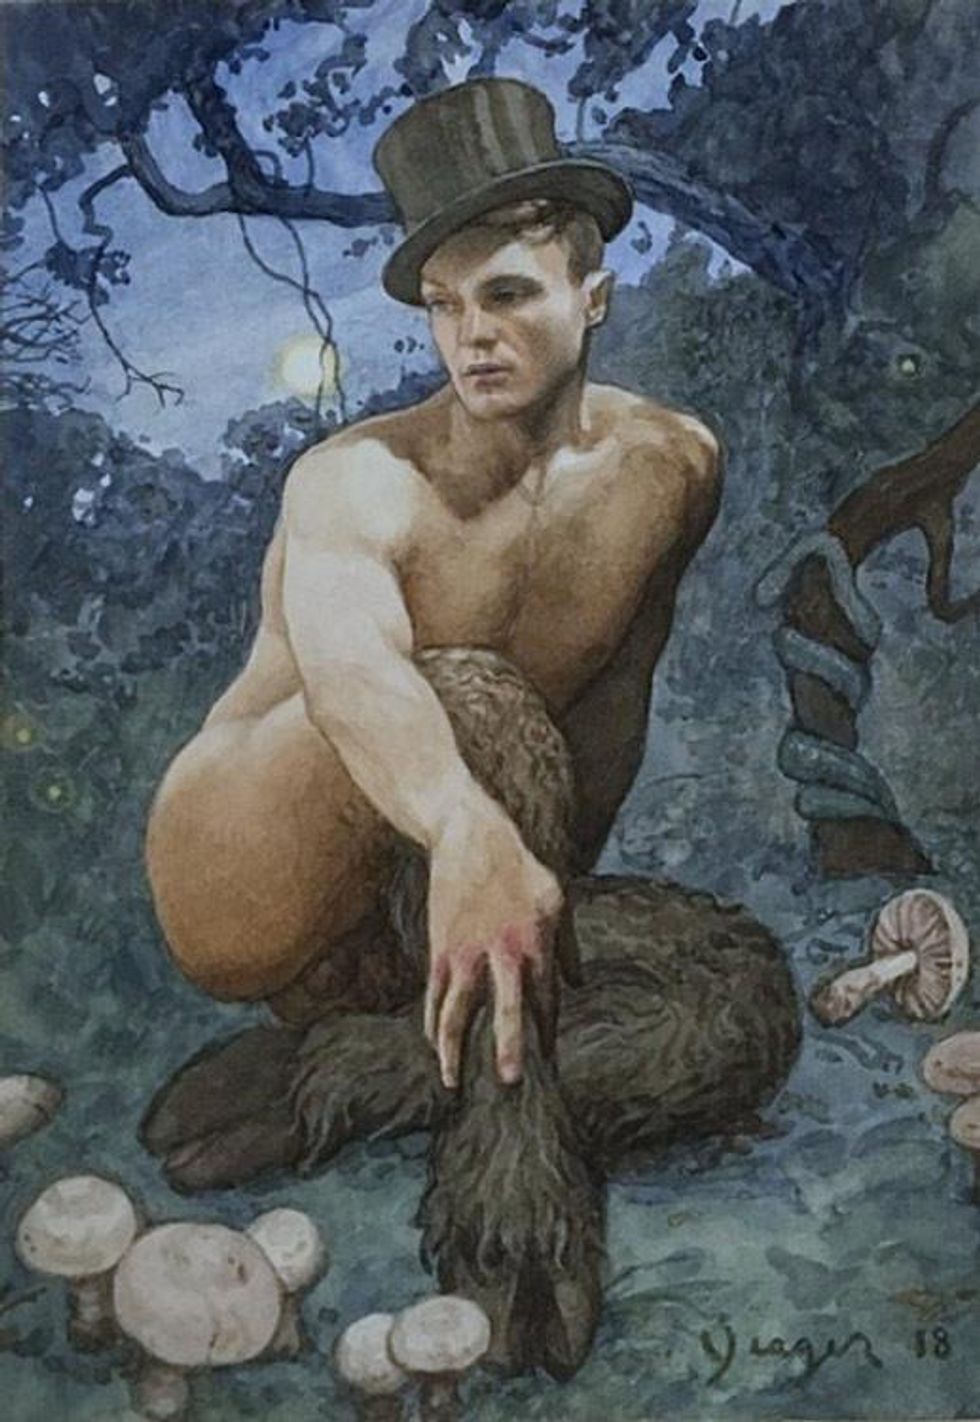 'Sunken Forest Satyr' featuring Kim David Smith 7"x10" watercolor 2018